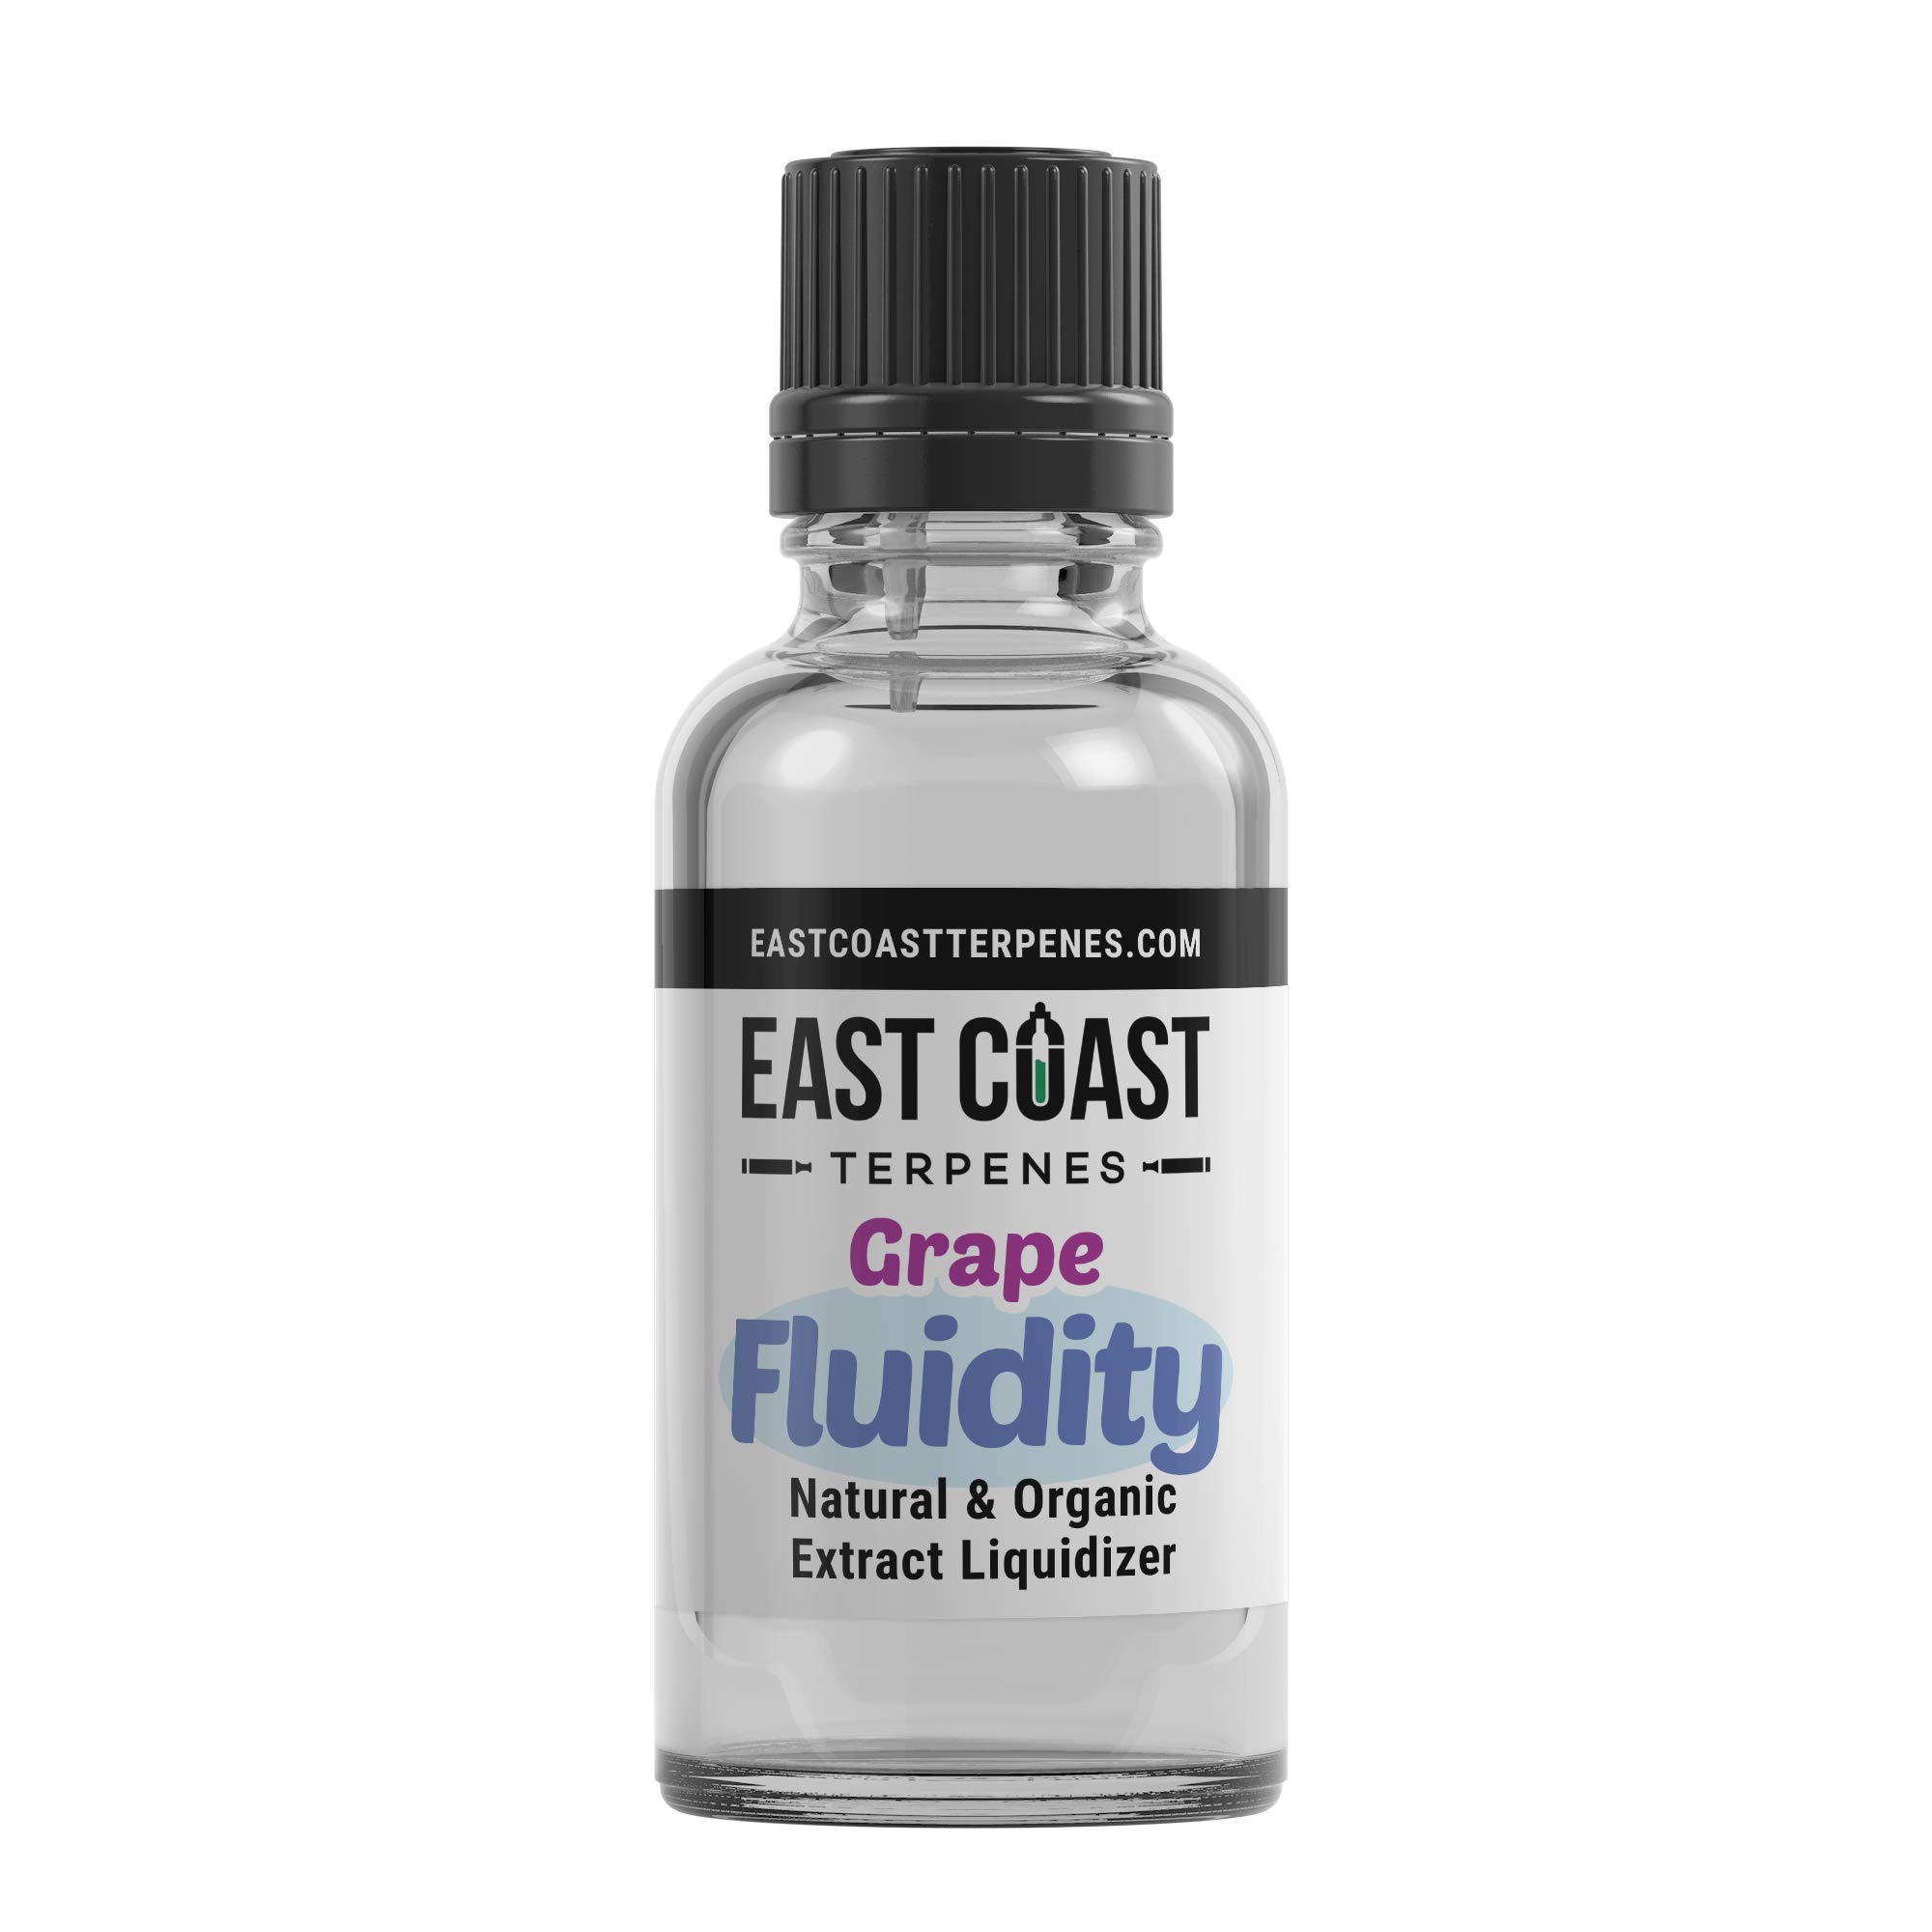 East Coast Terpenes - Grape Fluidity Herbal Extract Diluent Liquidizer for Concentrates, Waxes, and Oils - Pure Organic Solution - Eliminate Use of...